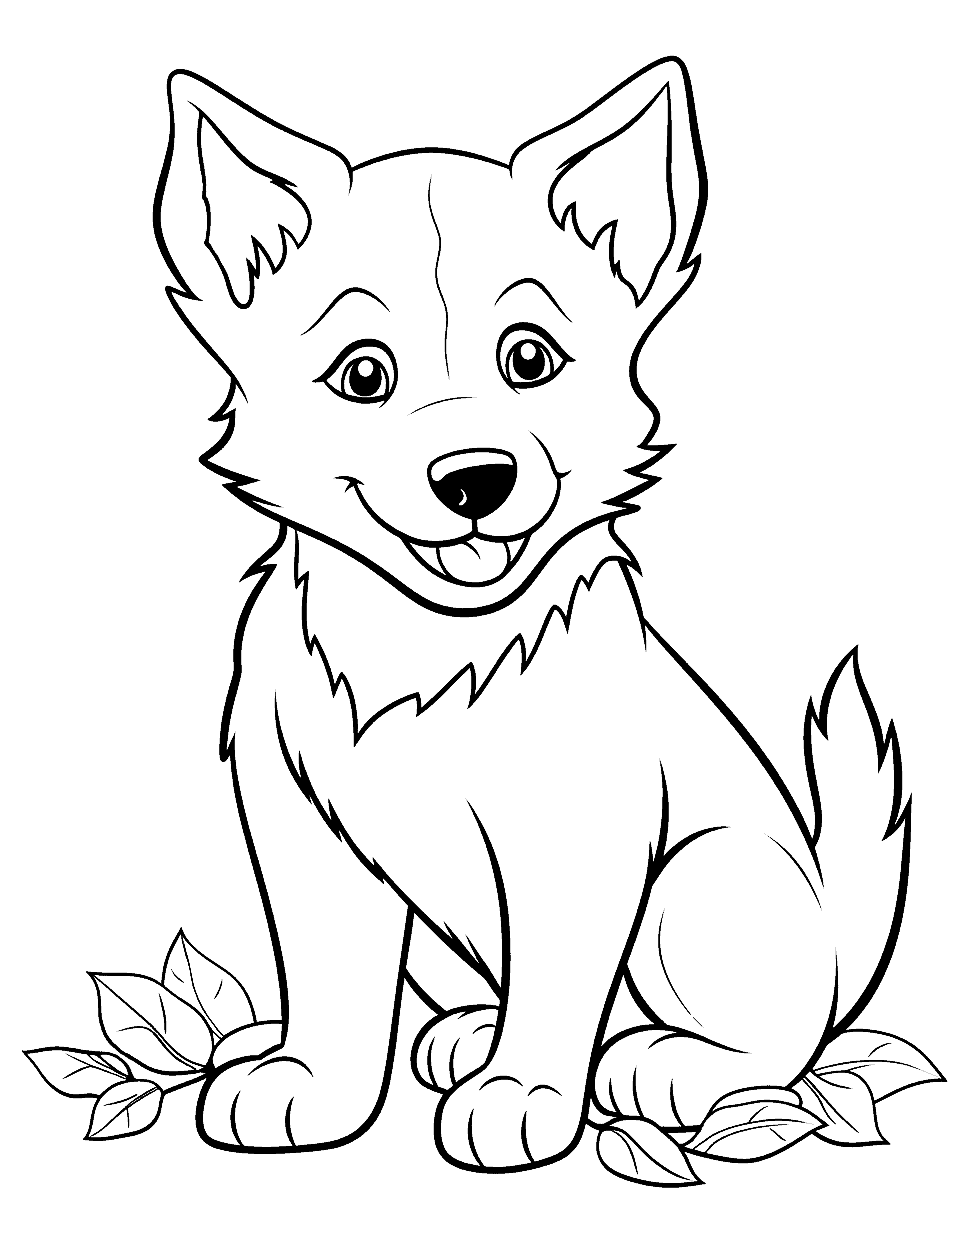 Autumn Leaves Husky Playing in Puppy Coloring Page - A Husky puppy enjoying a sunny autumn day, playing in a pile of leaves.